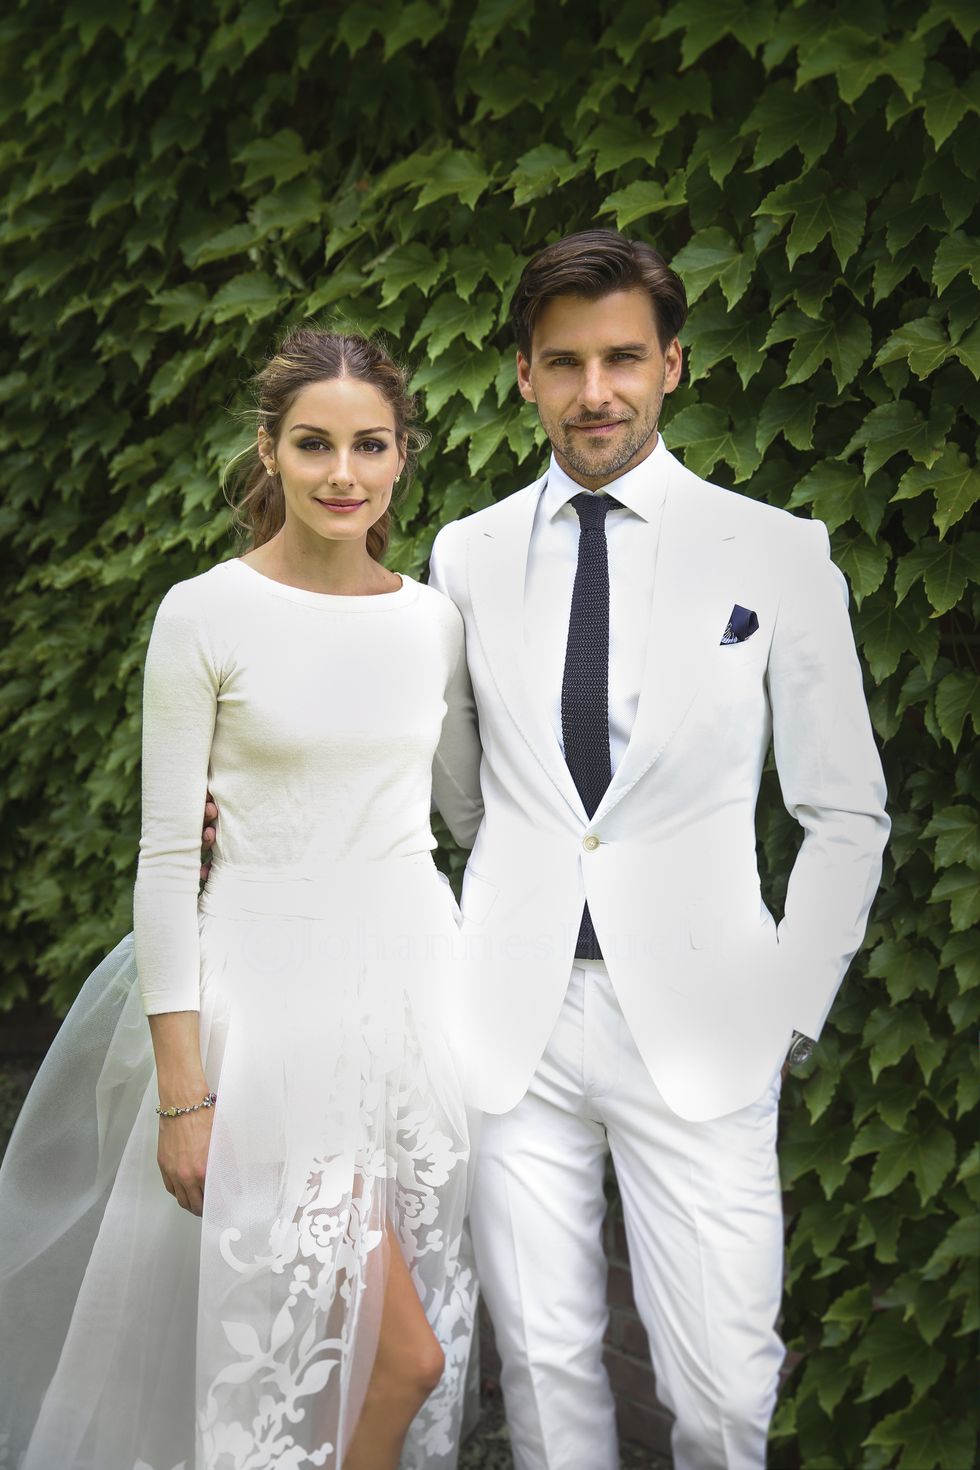 Totally reinventing our idea of bridal beauty, Olivia Palermo nailed it on her wedding day to Johannes Huebl wearing a fine cream knit and white skirt. 